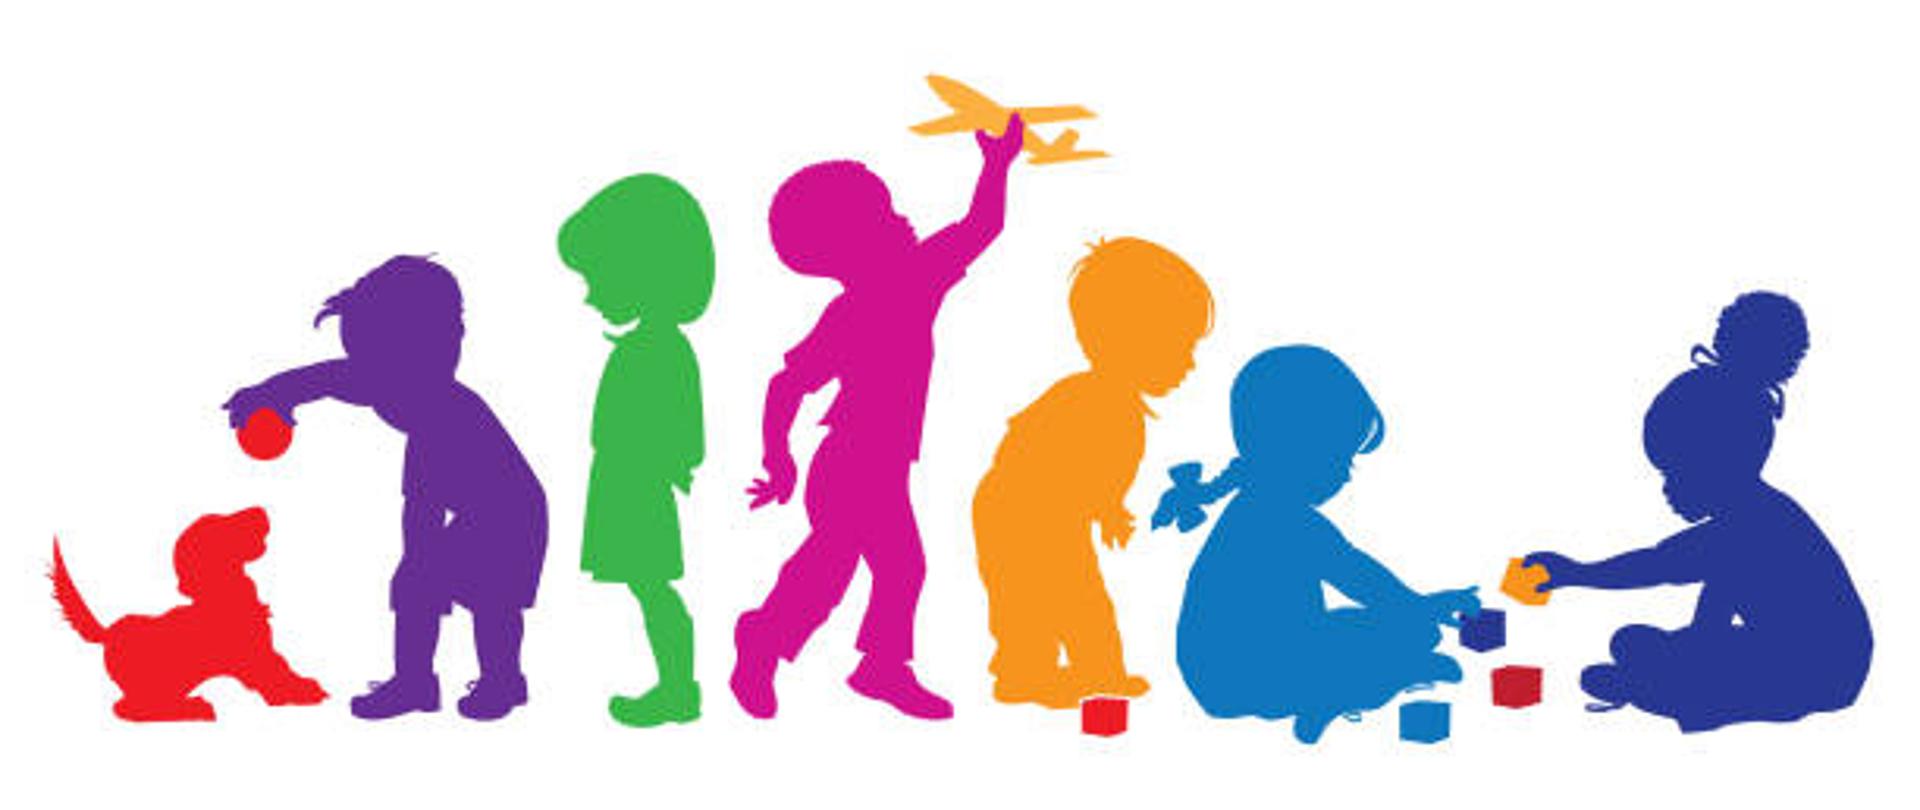 Silhouettes of young children at play.